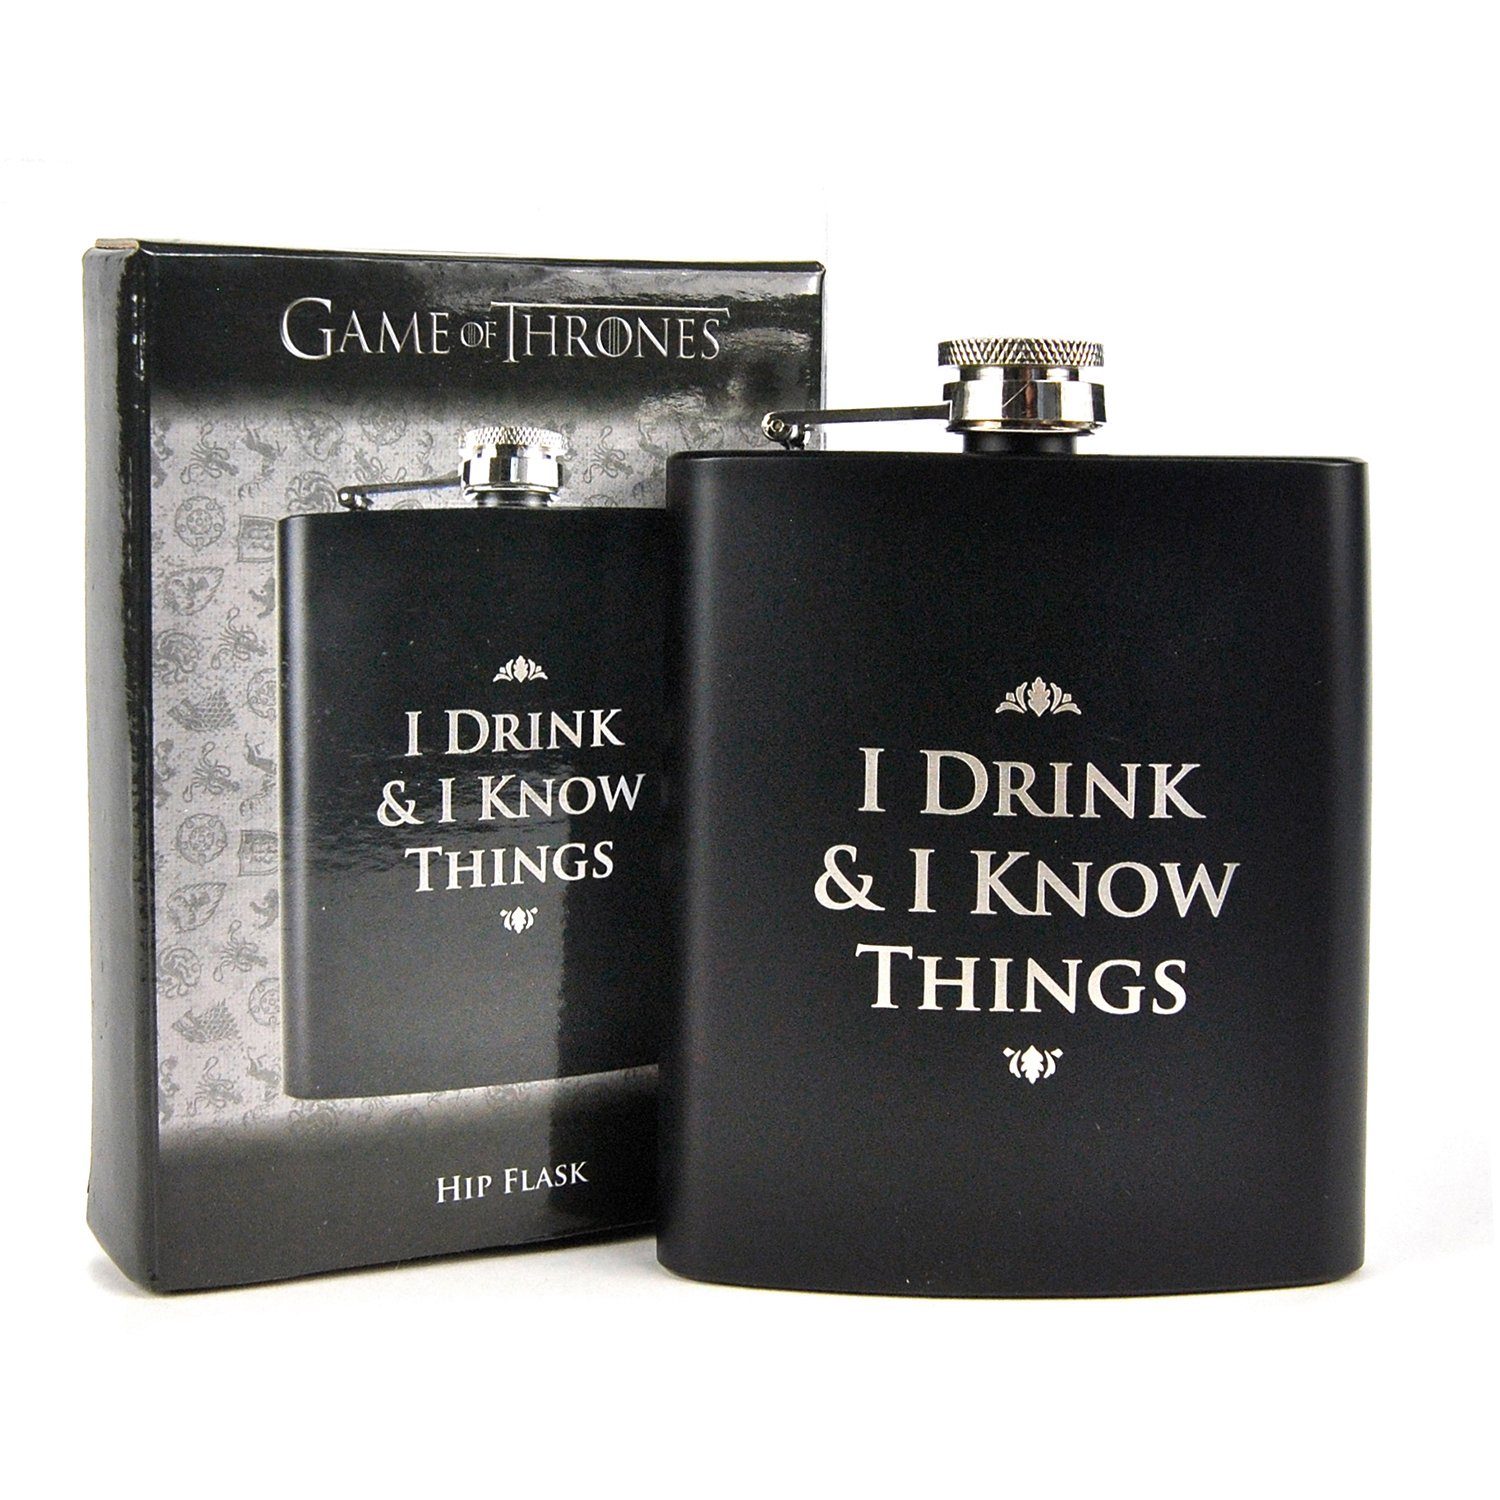 HMB Tasse Game of Thrones Flachmann I DRINK & I KNOW THINGS